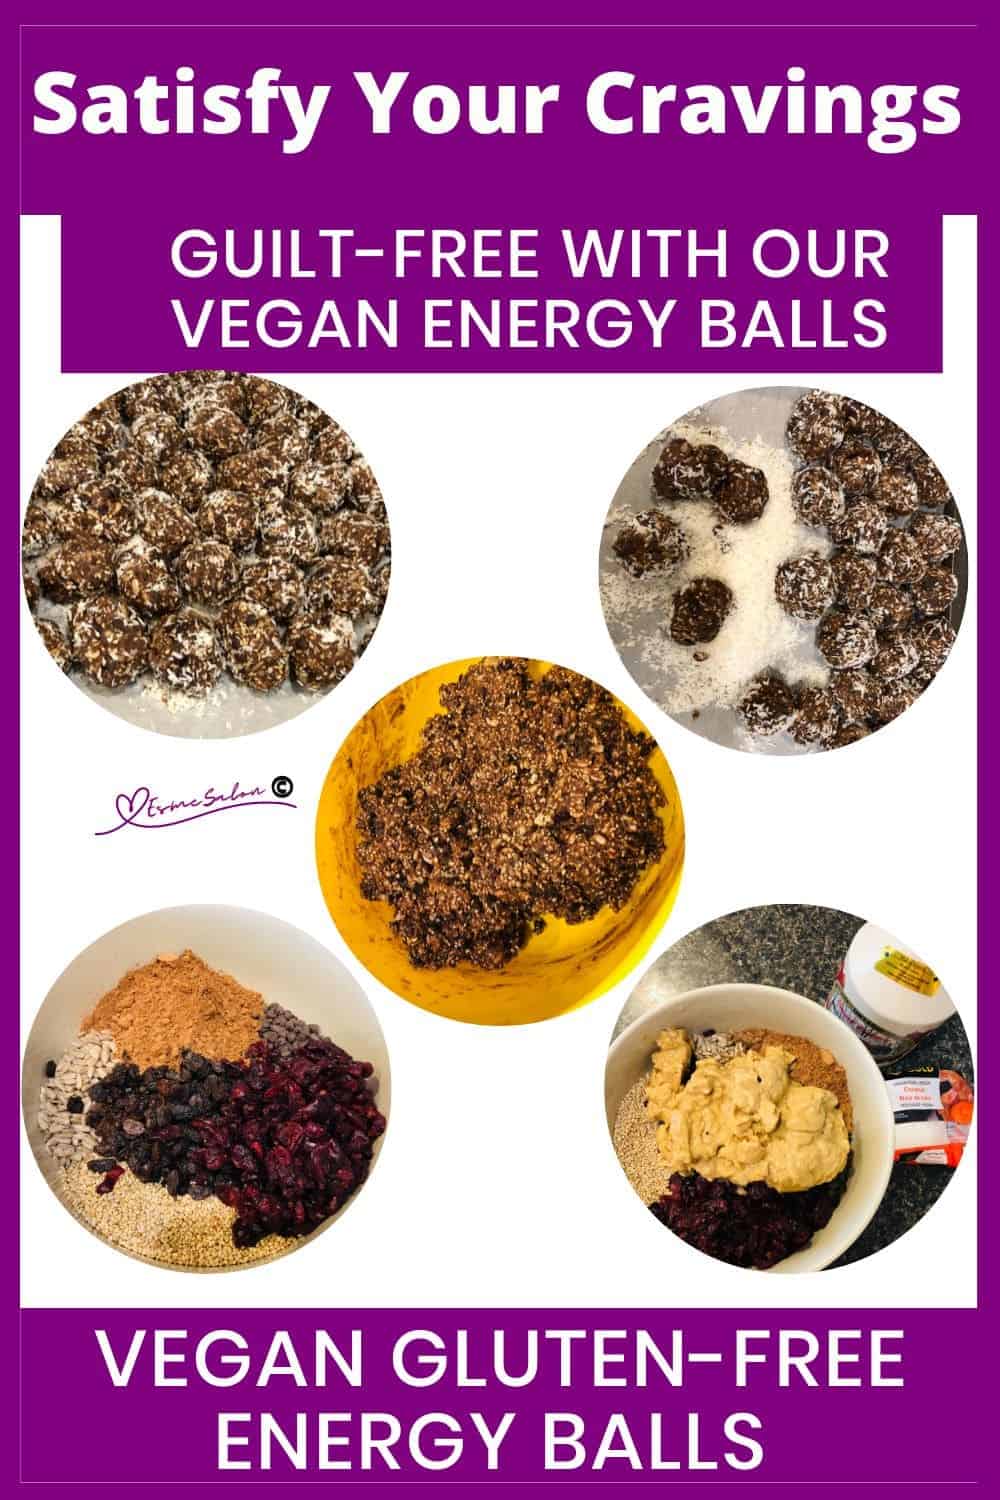 an image of Fruity Seedy Vegan Gluten-free Energy Balls rolled in coconut